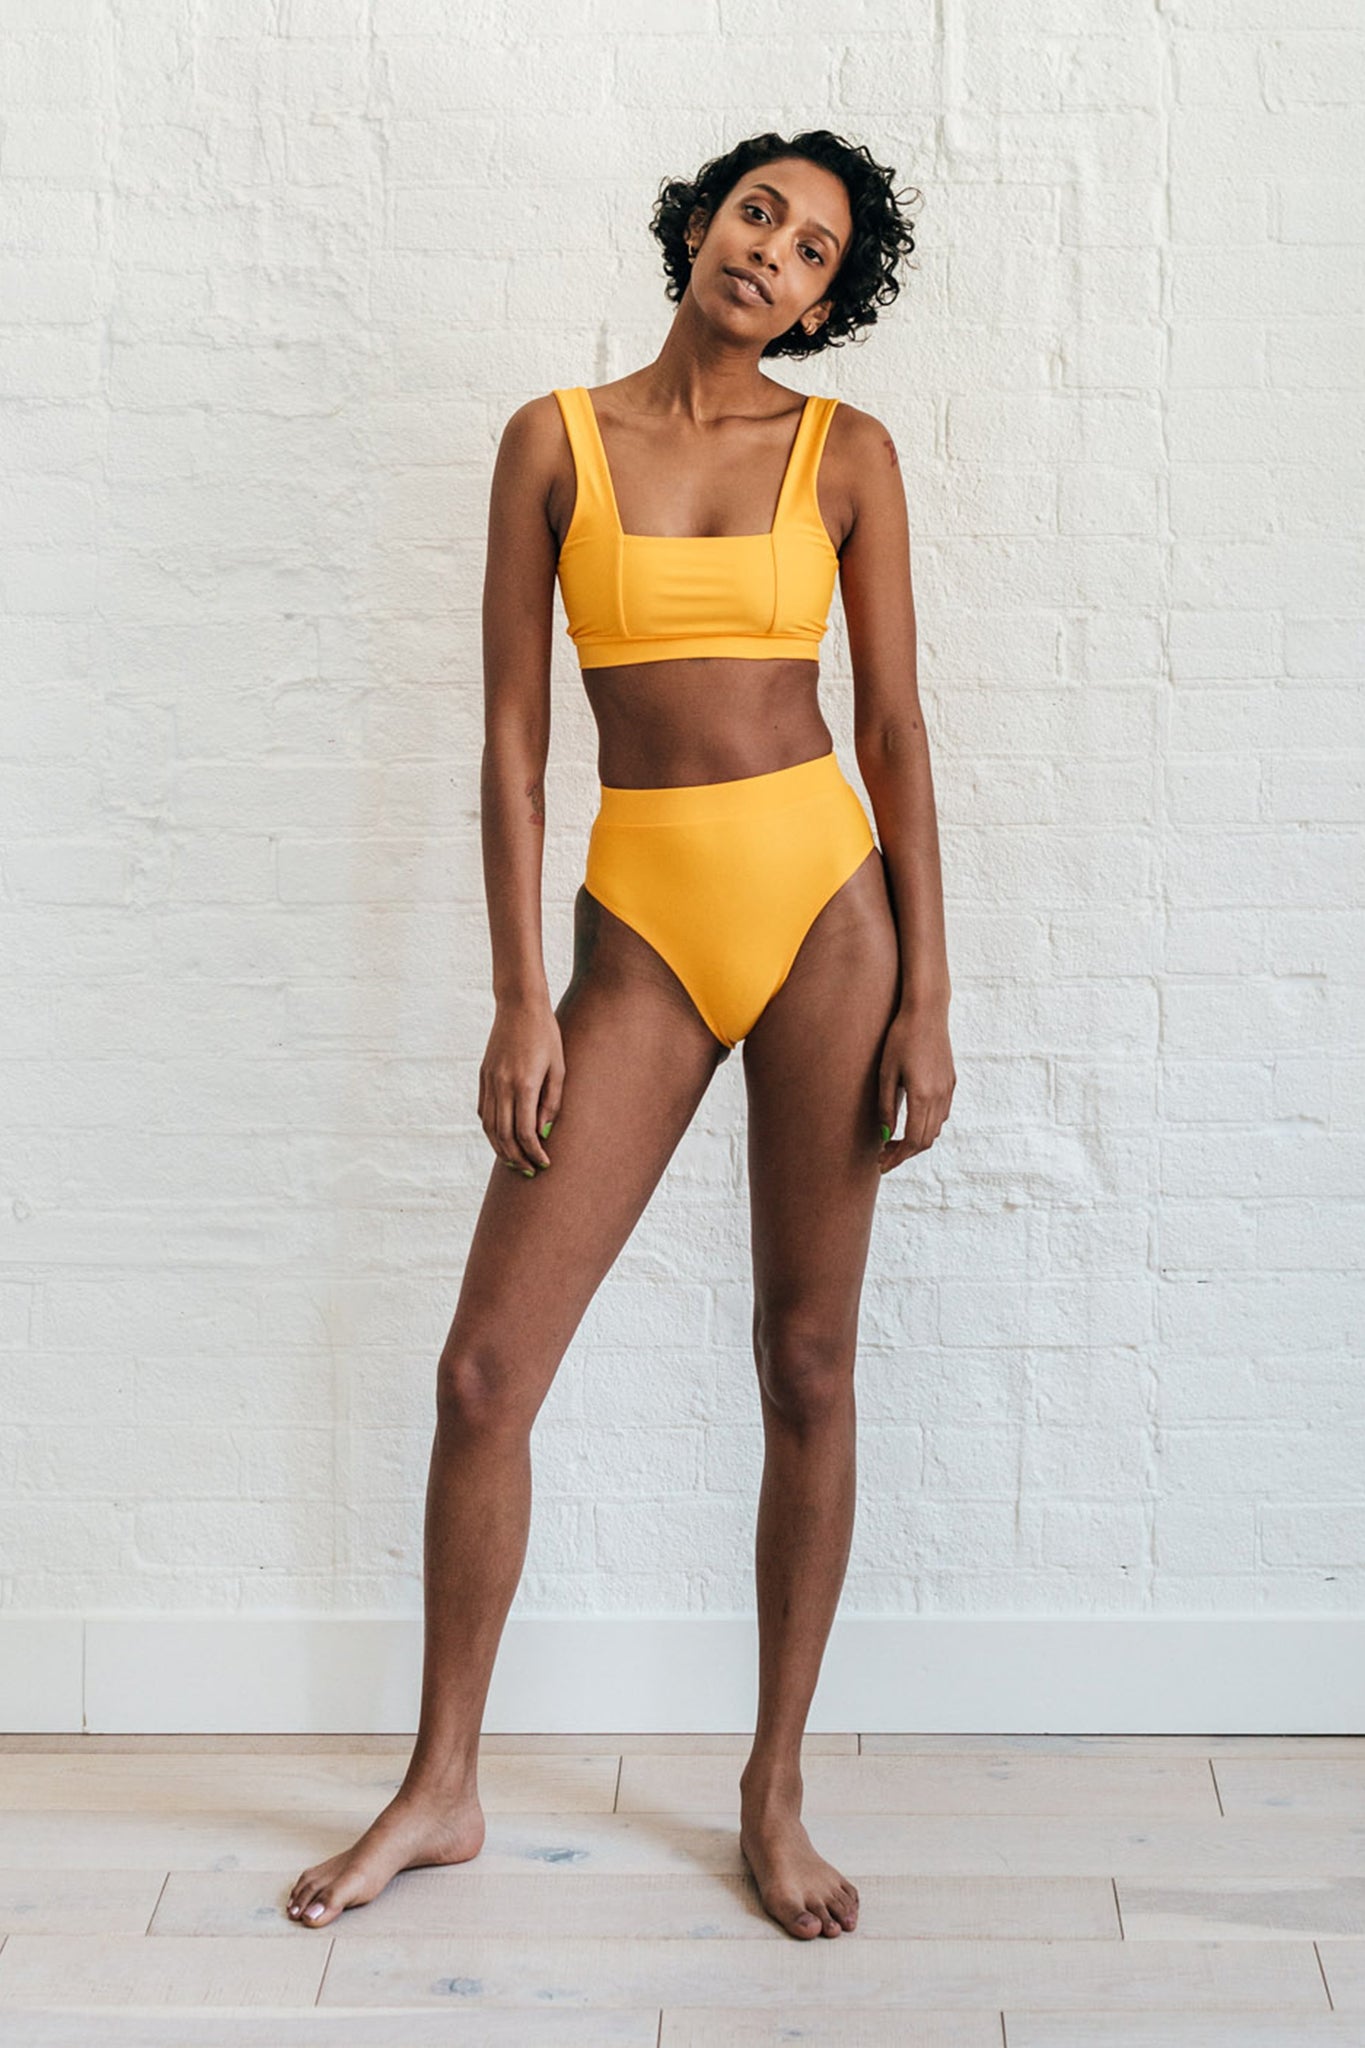 A woman standing in front of a white wall leaning her head to the side wearing mustard yellow high waisted bikini bottoms and a matching mustard yellow bikini top with a square neckline.